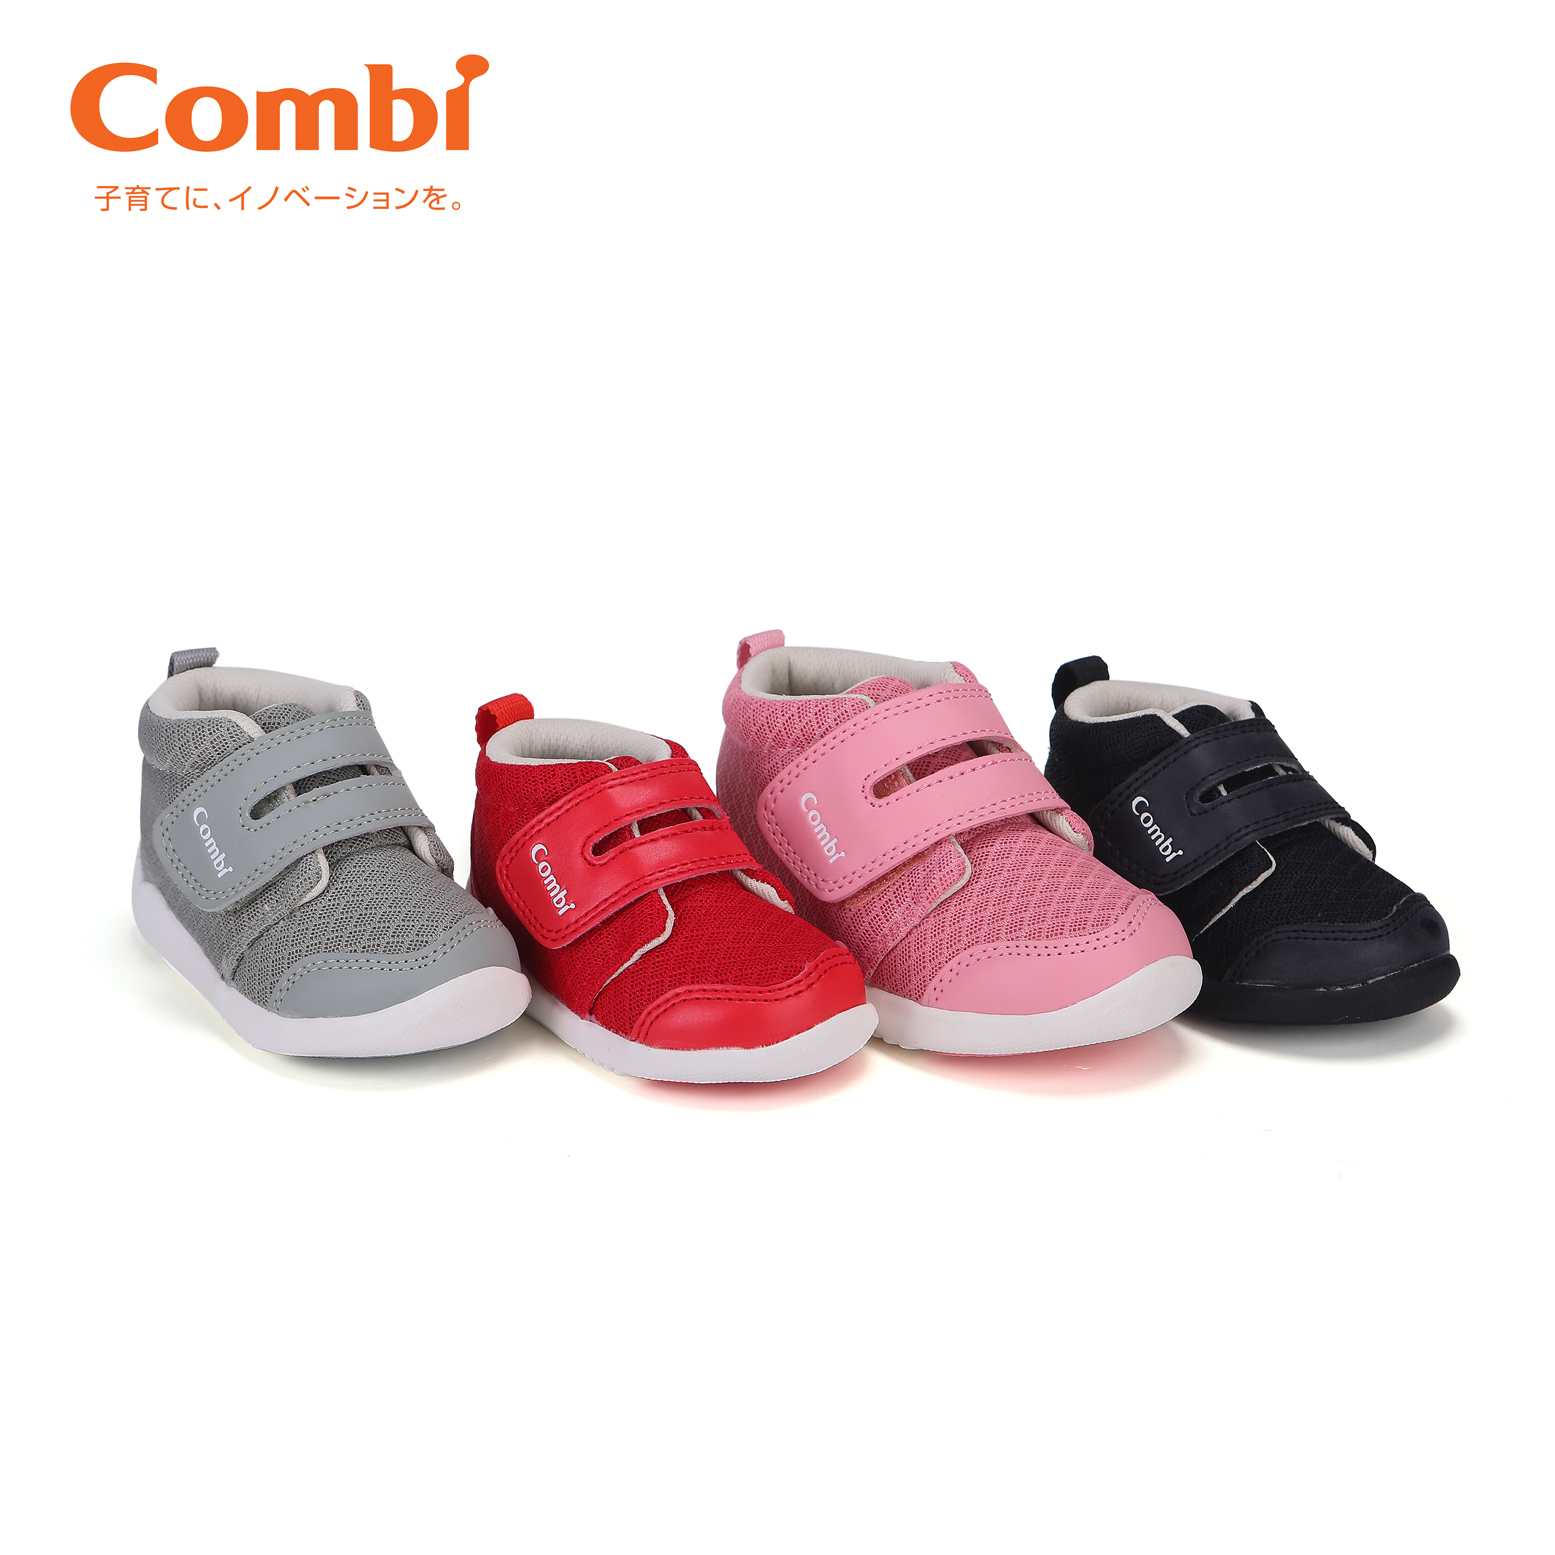 Giầy cao cổ Combi Classic size 16.5